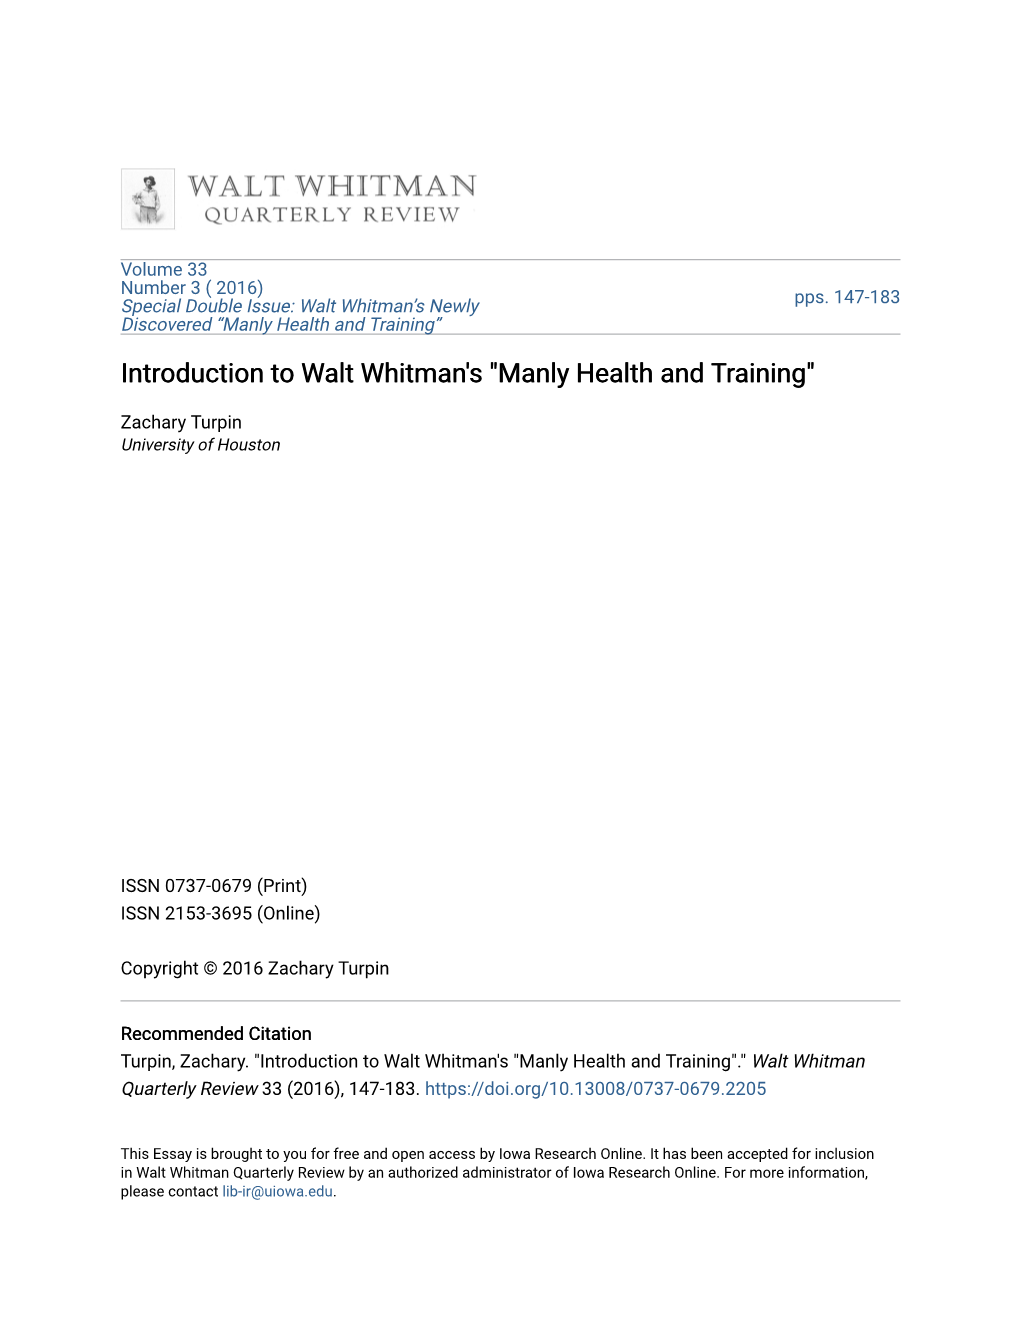 Introduction to Walt Whitman's "Manly Health and Training"